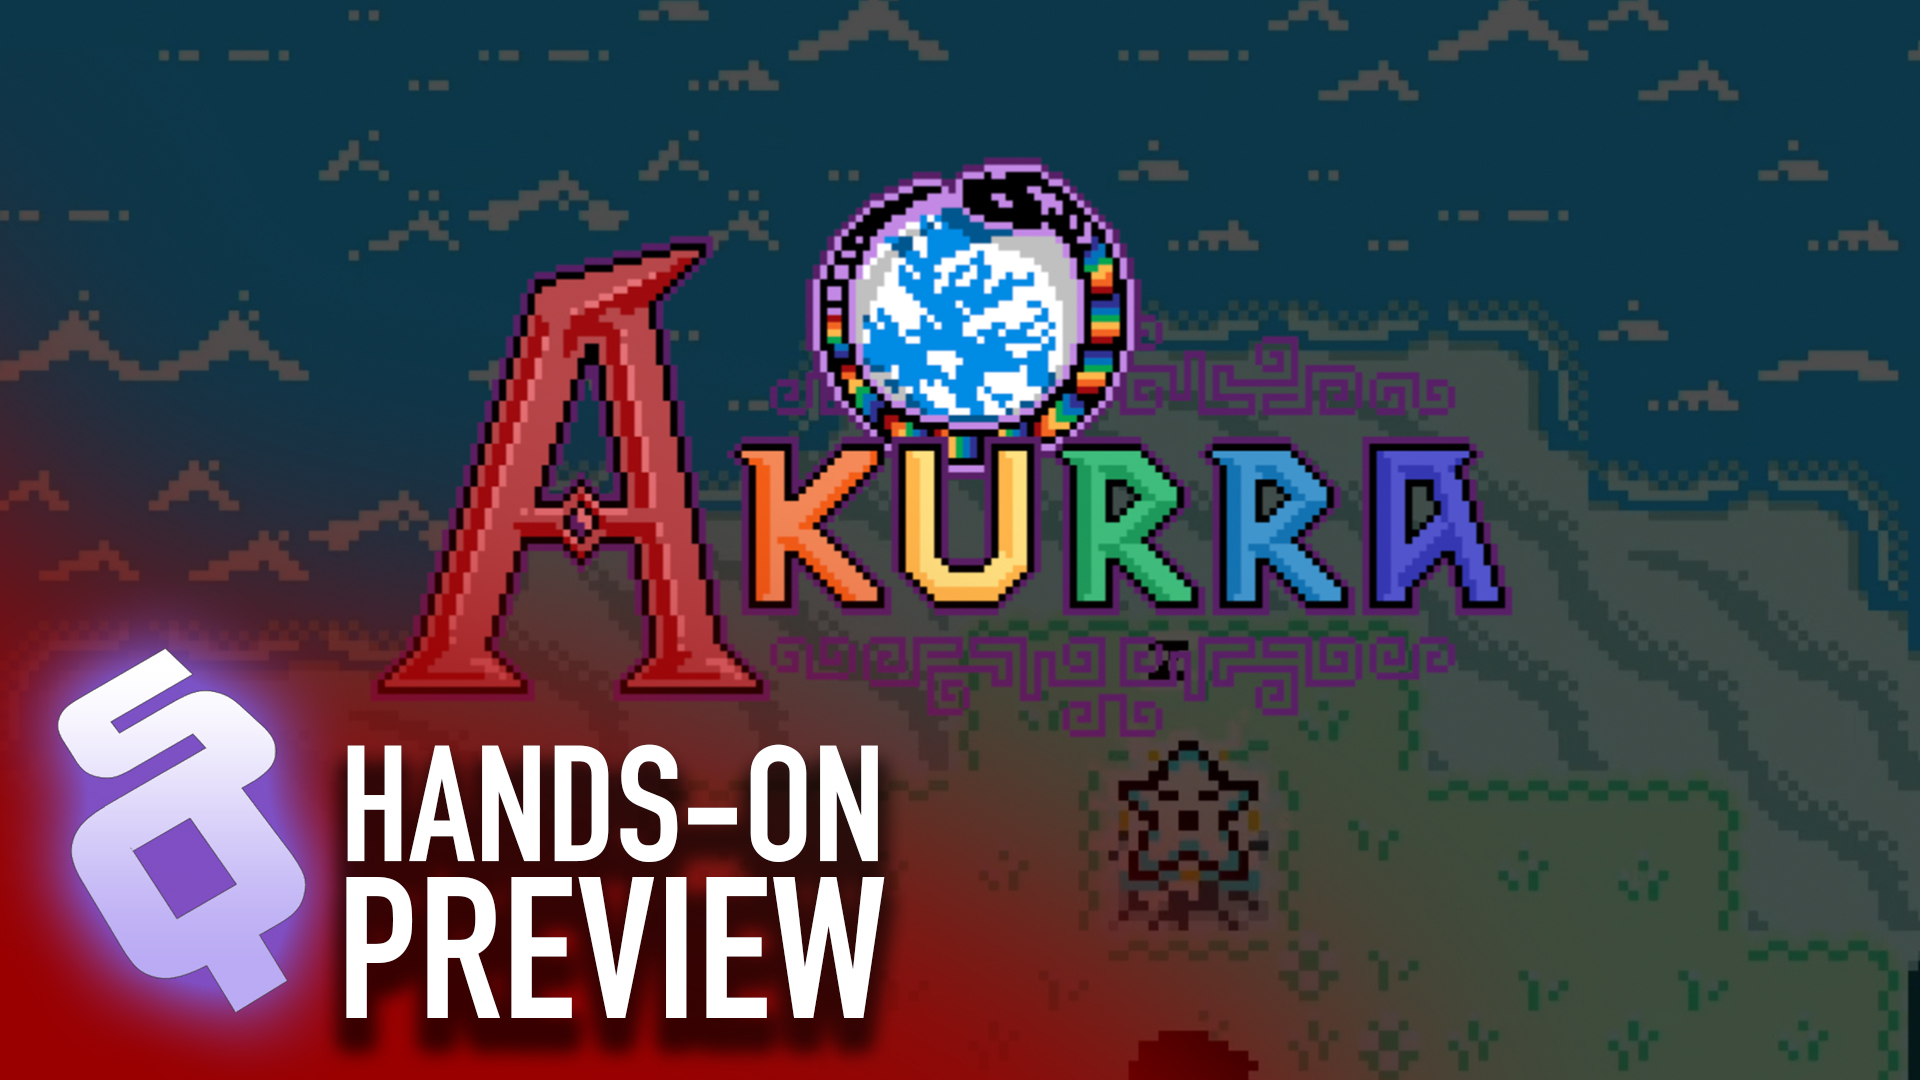 Hands-on Preview: Akurra